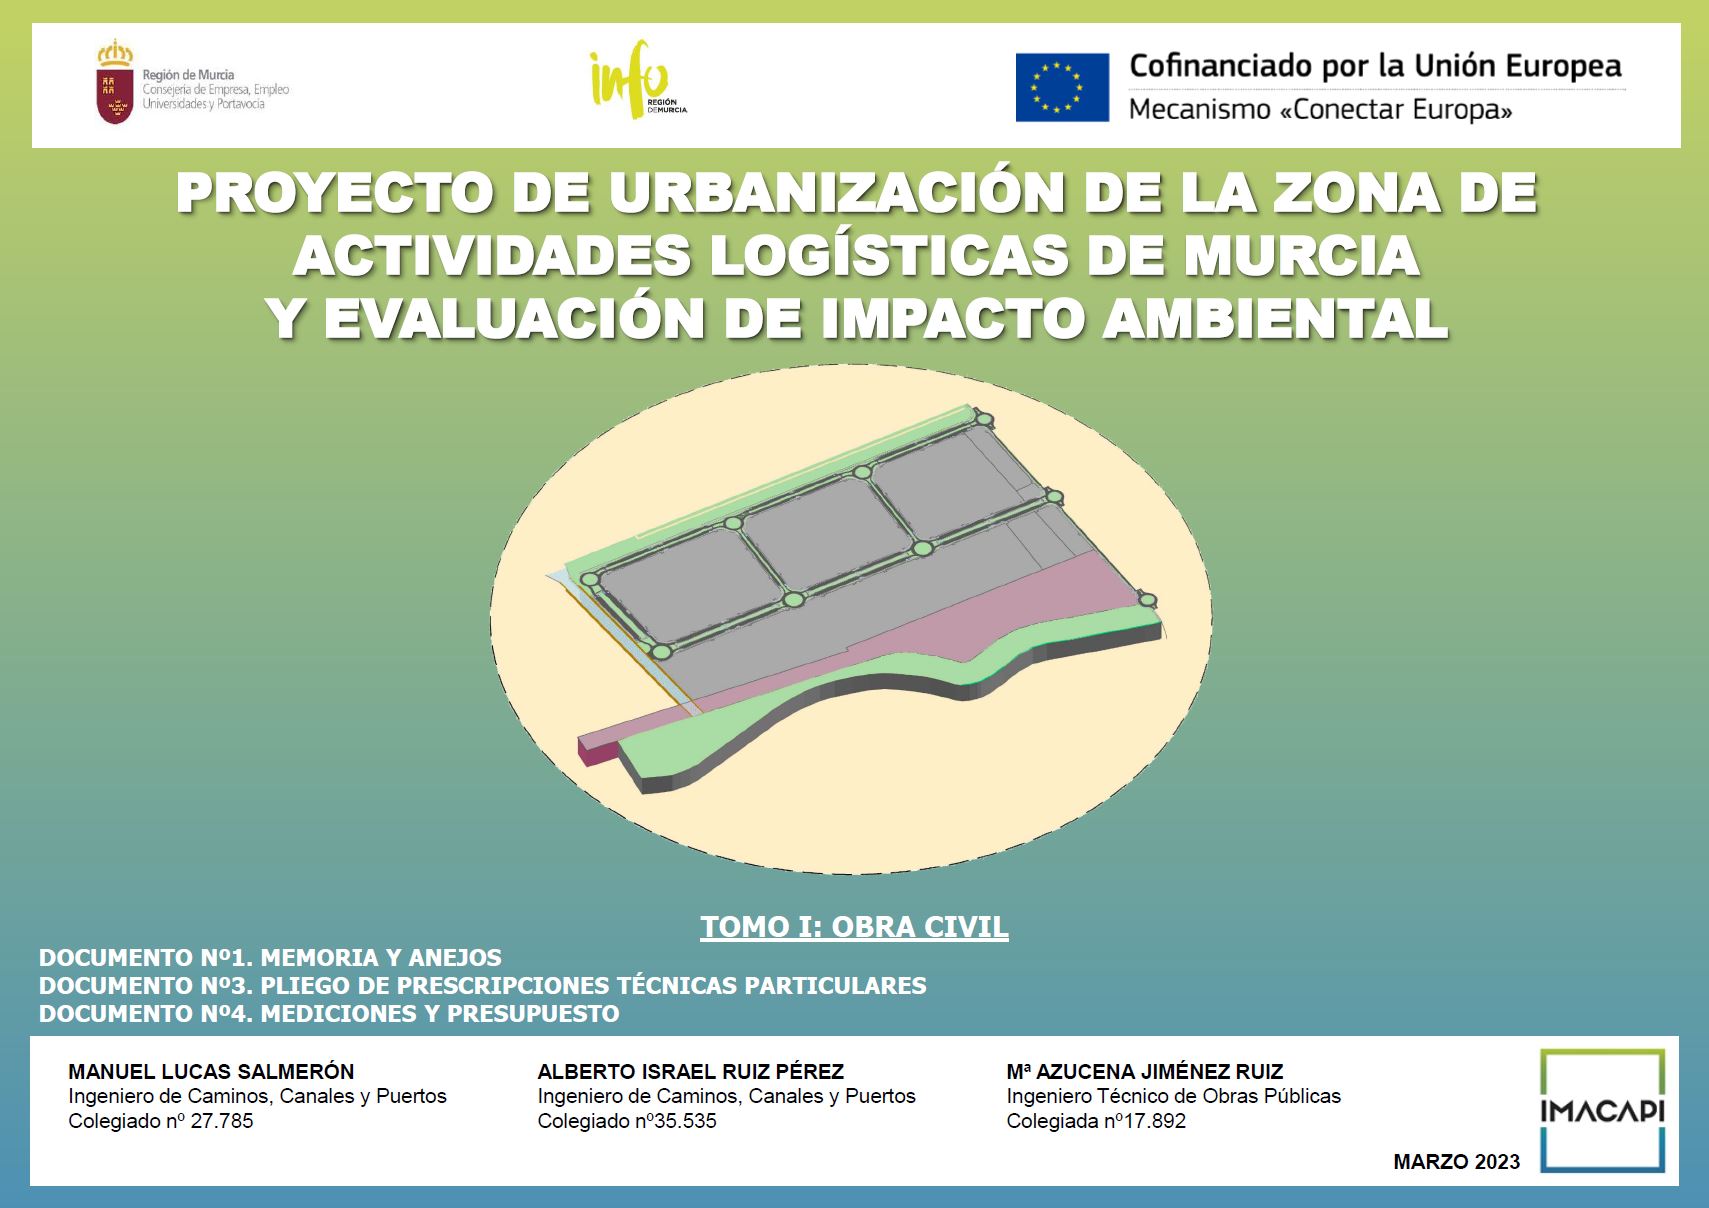 Tender Announcement. Technical Assistance for the support and monitoring of the CFE-2 projectIntermodal Terminal and Railway Connection of the ZAL of Murcia